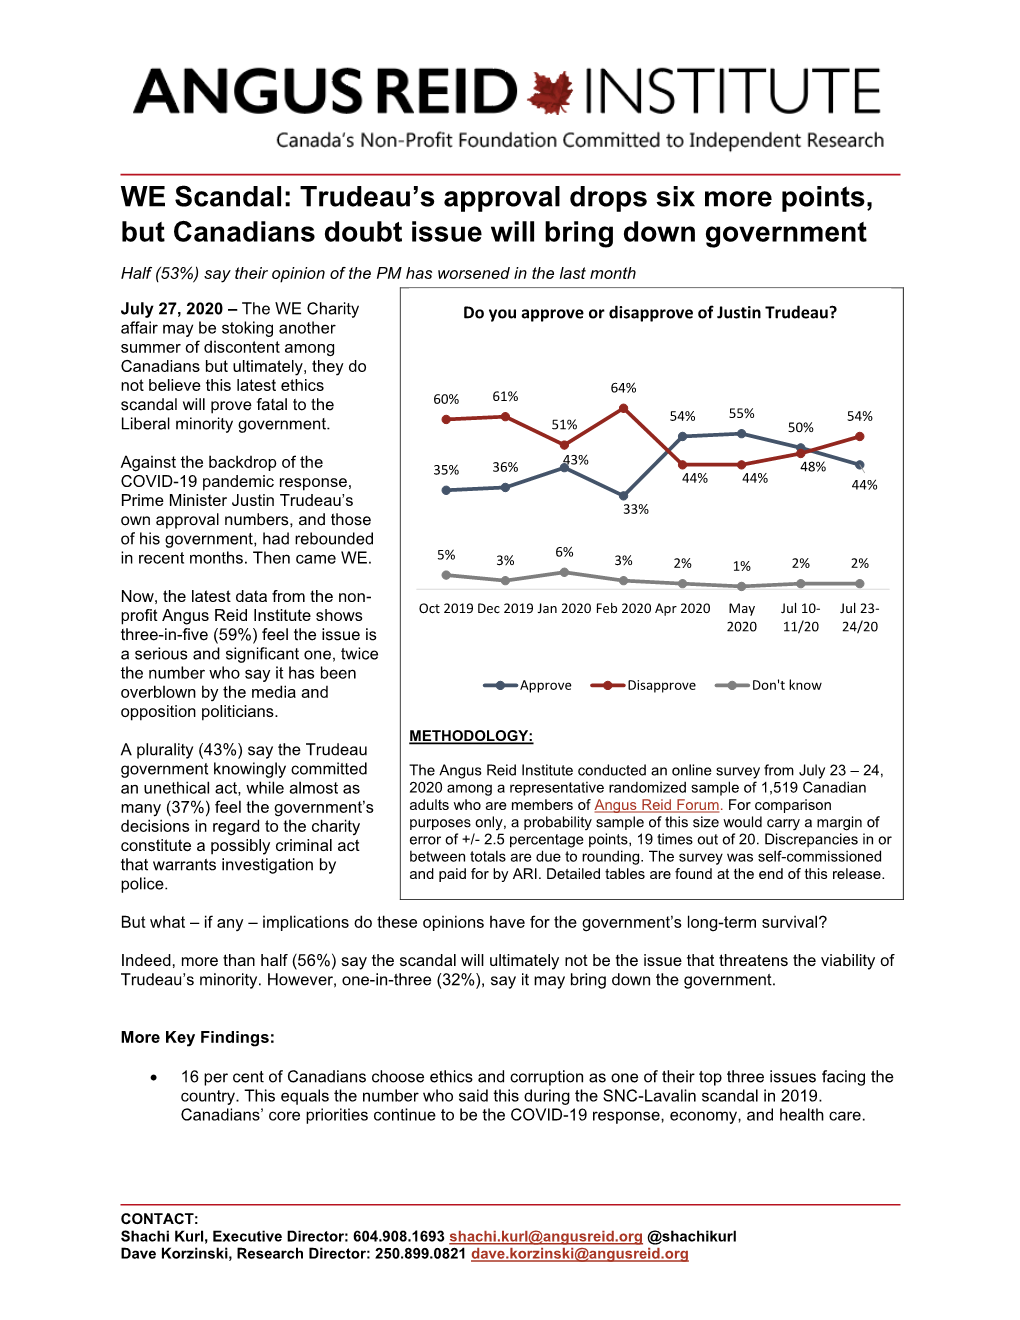 WE Scandal: Trudeau's Approval Drops Six More Points, But